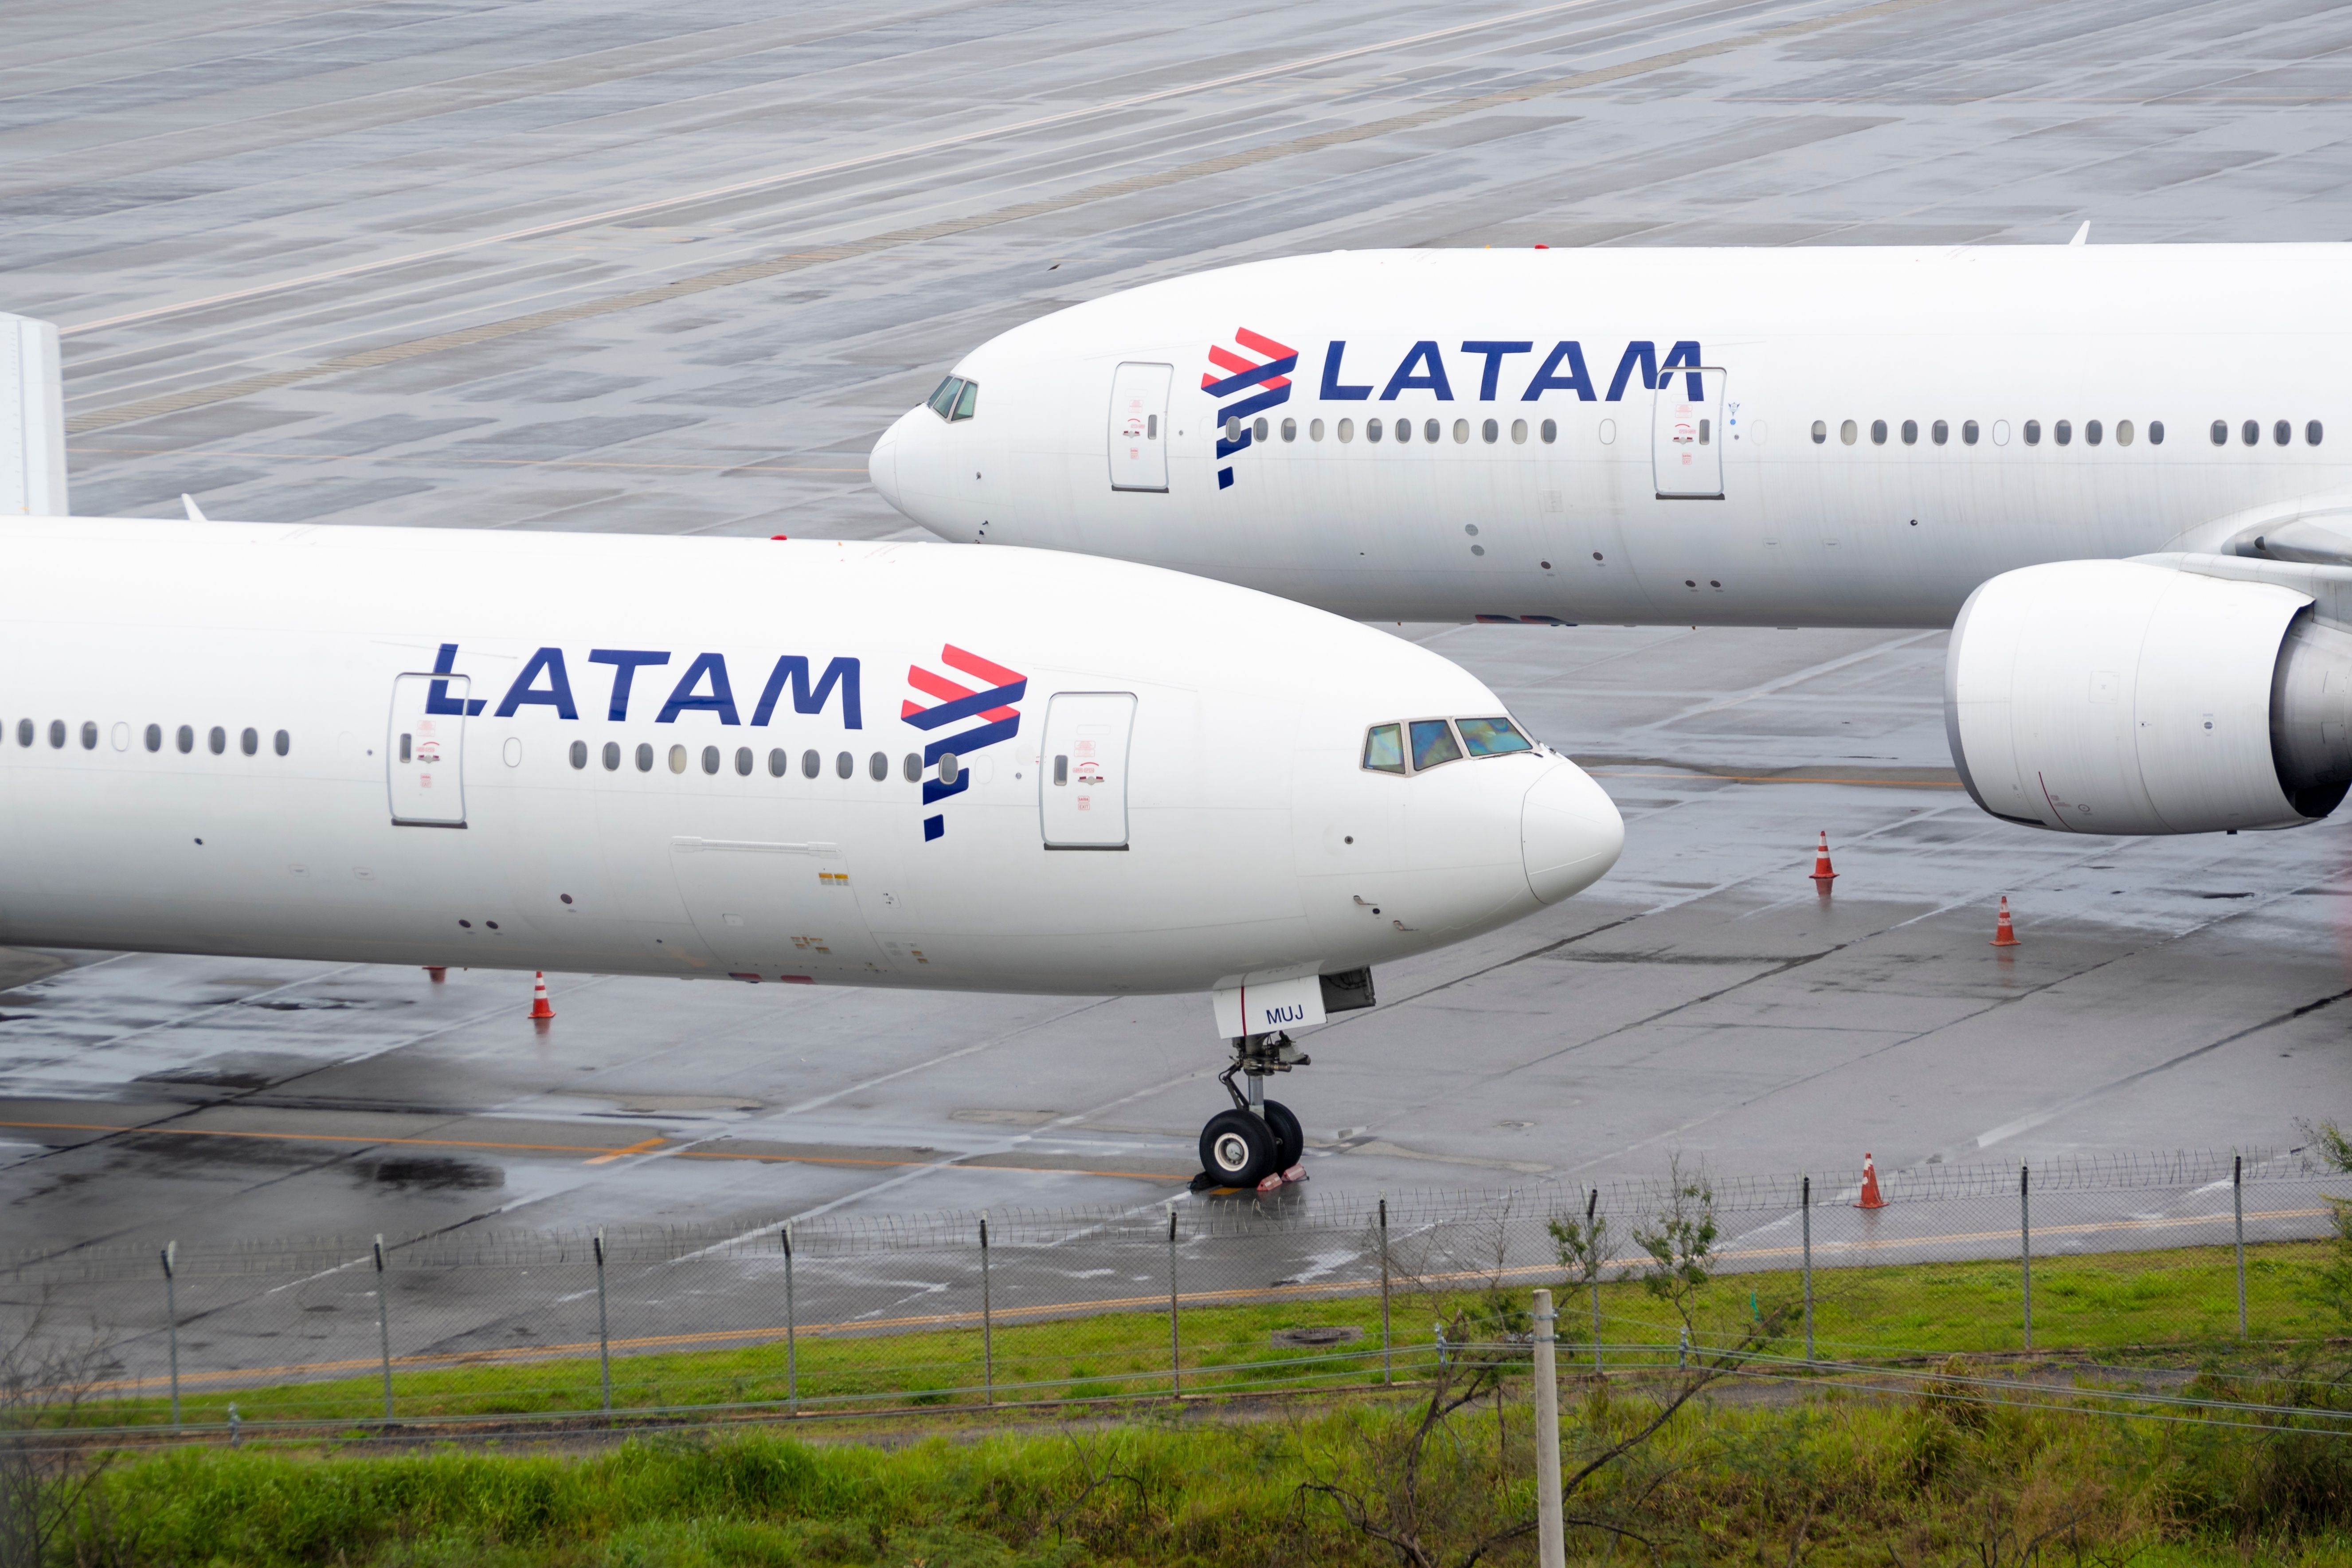 Two LATAM Boeing 777-300s parked at an airport.